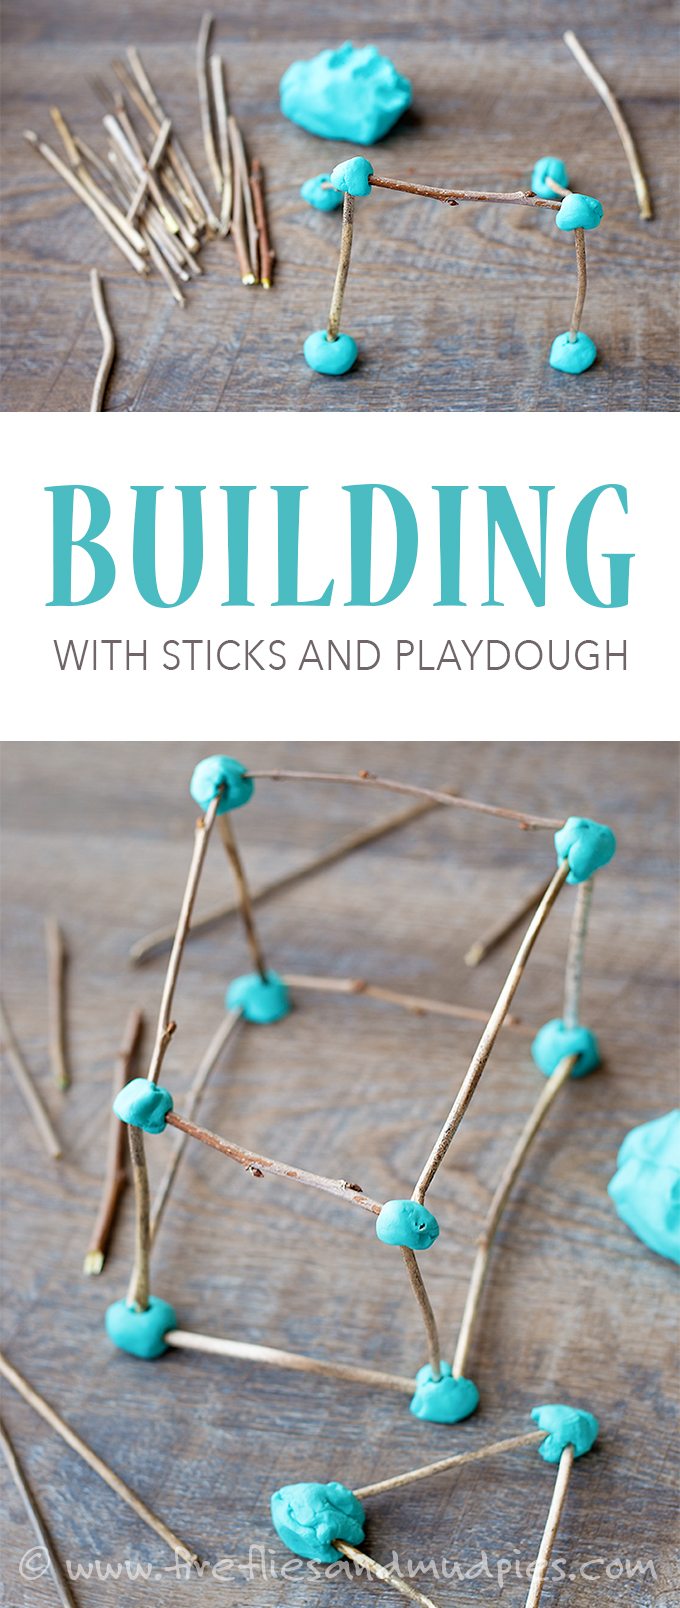 Building with Sticks and Playdough | Fireflies and Mud Pies